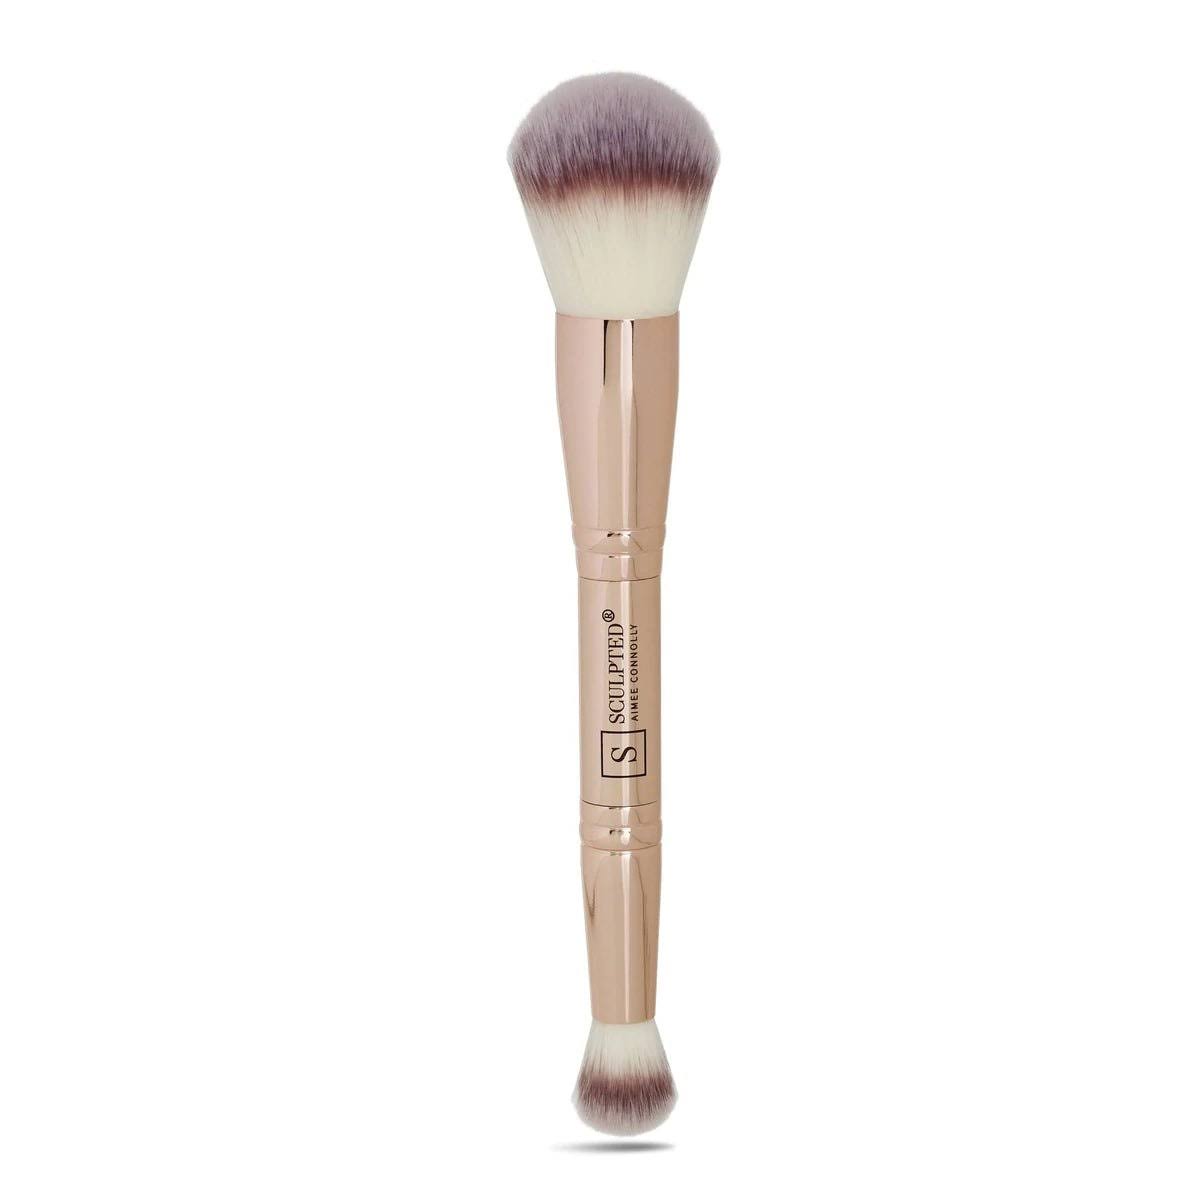 Sculpted By Aimee Beauty Buffer Complexion Brush Duo